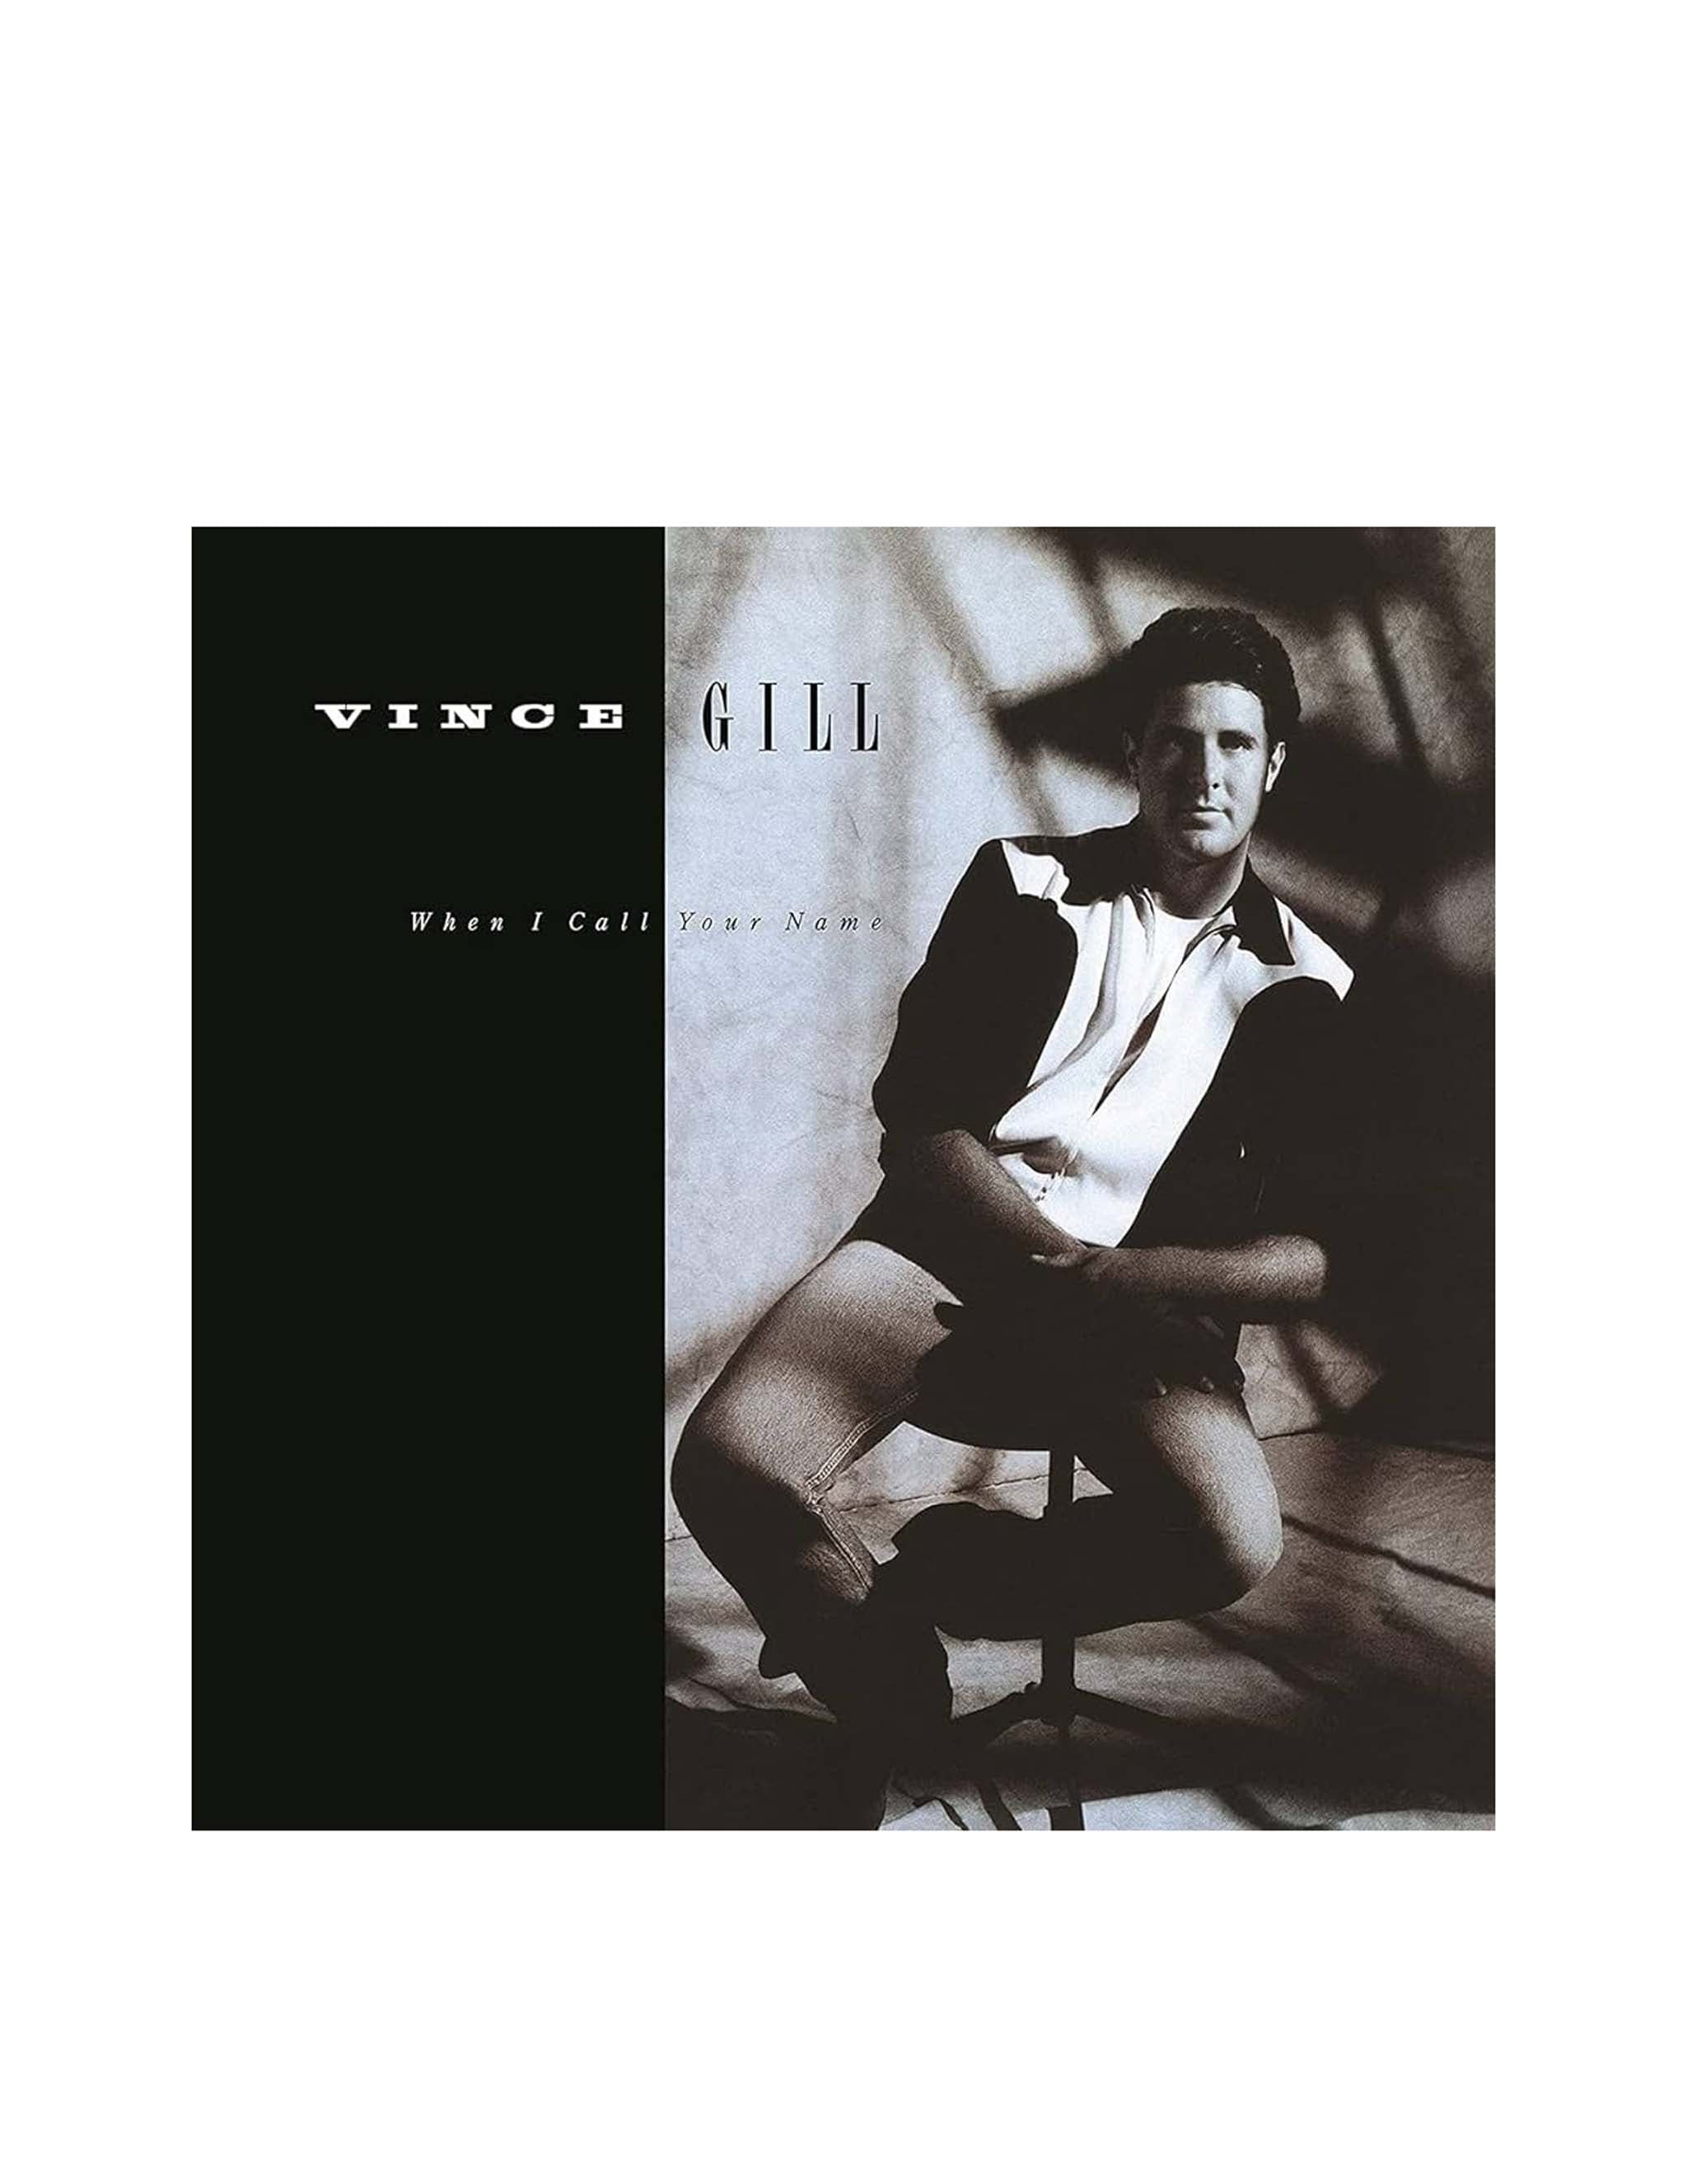 Vince Gill: When I Call Your Name (LP)